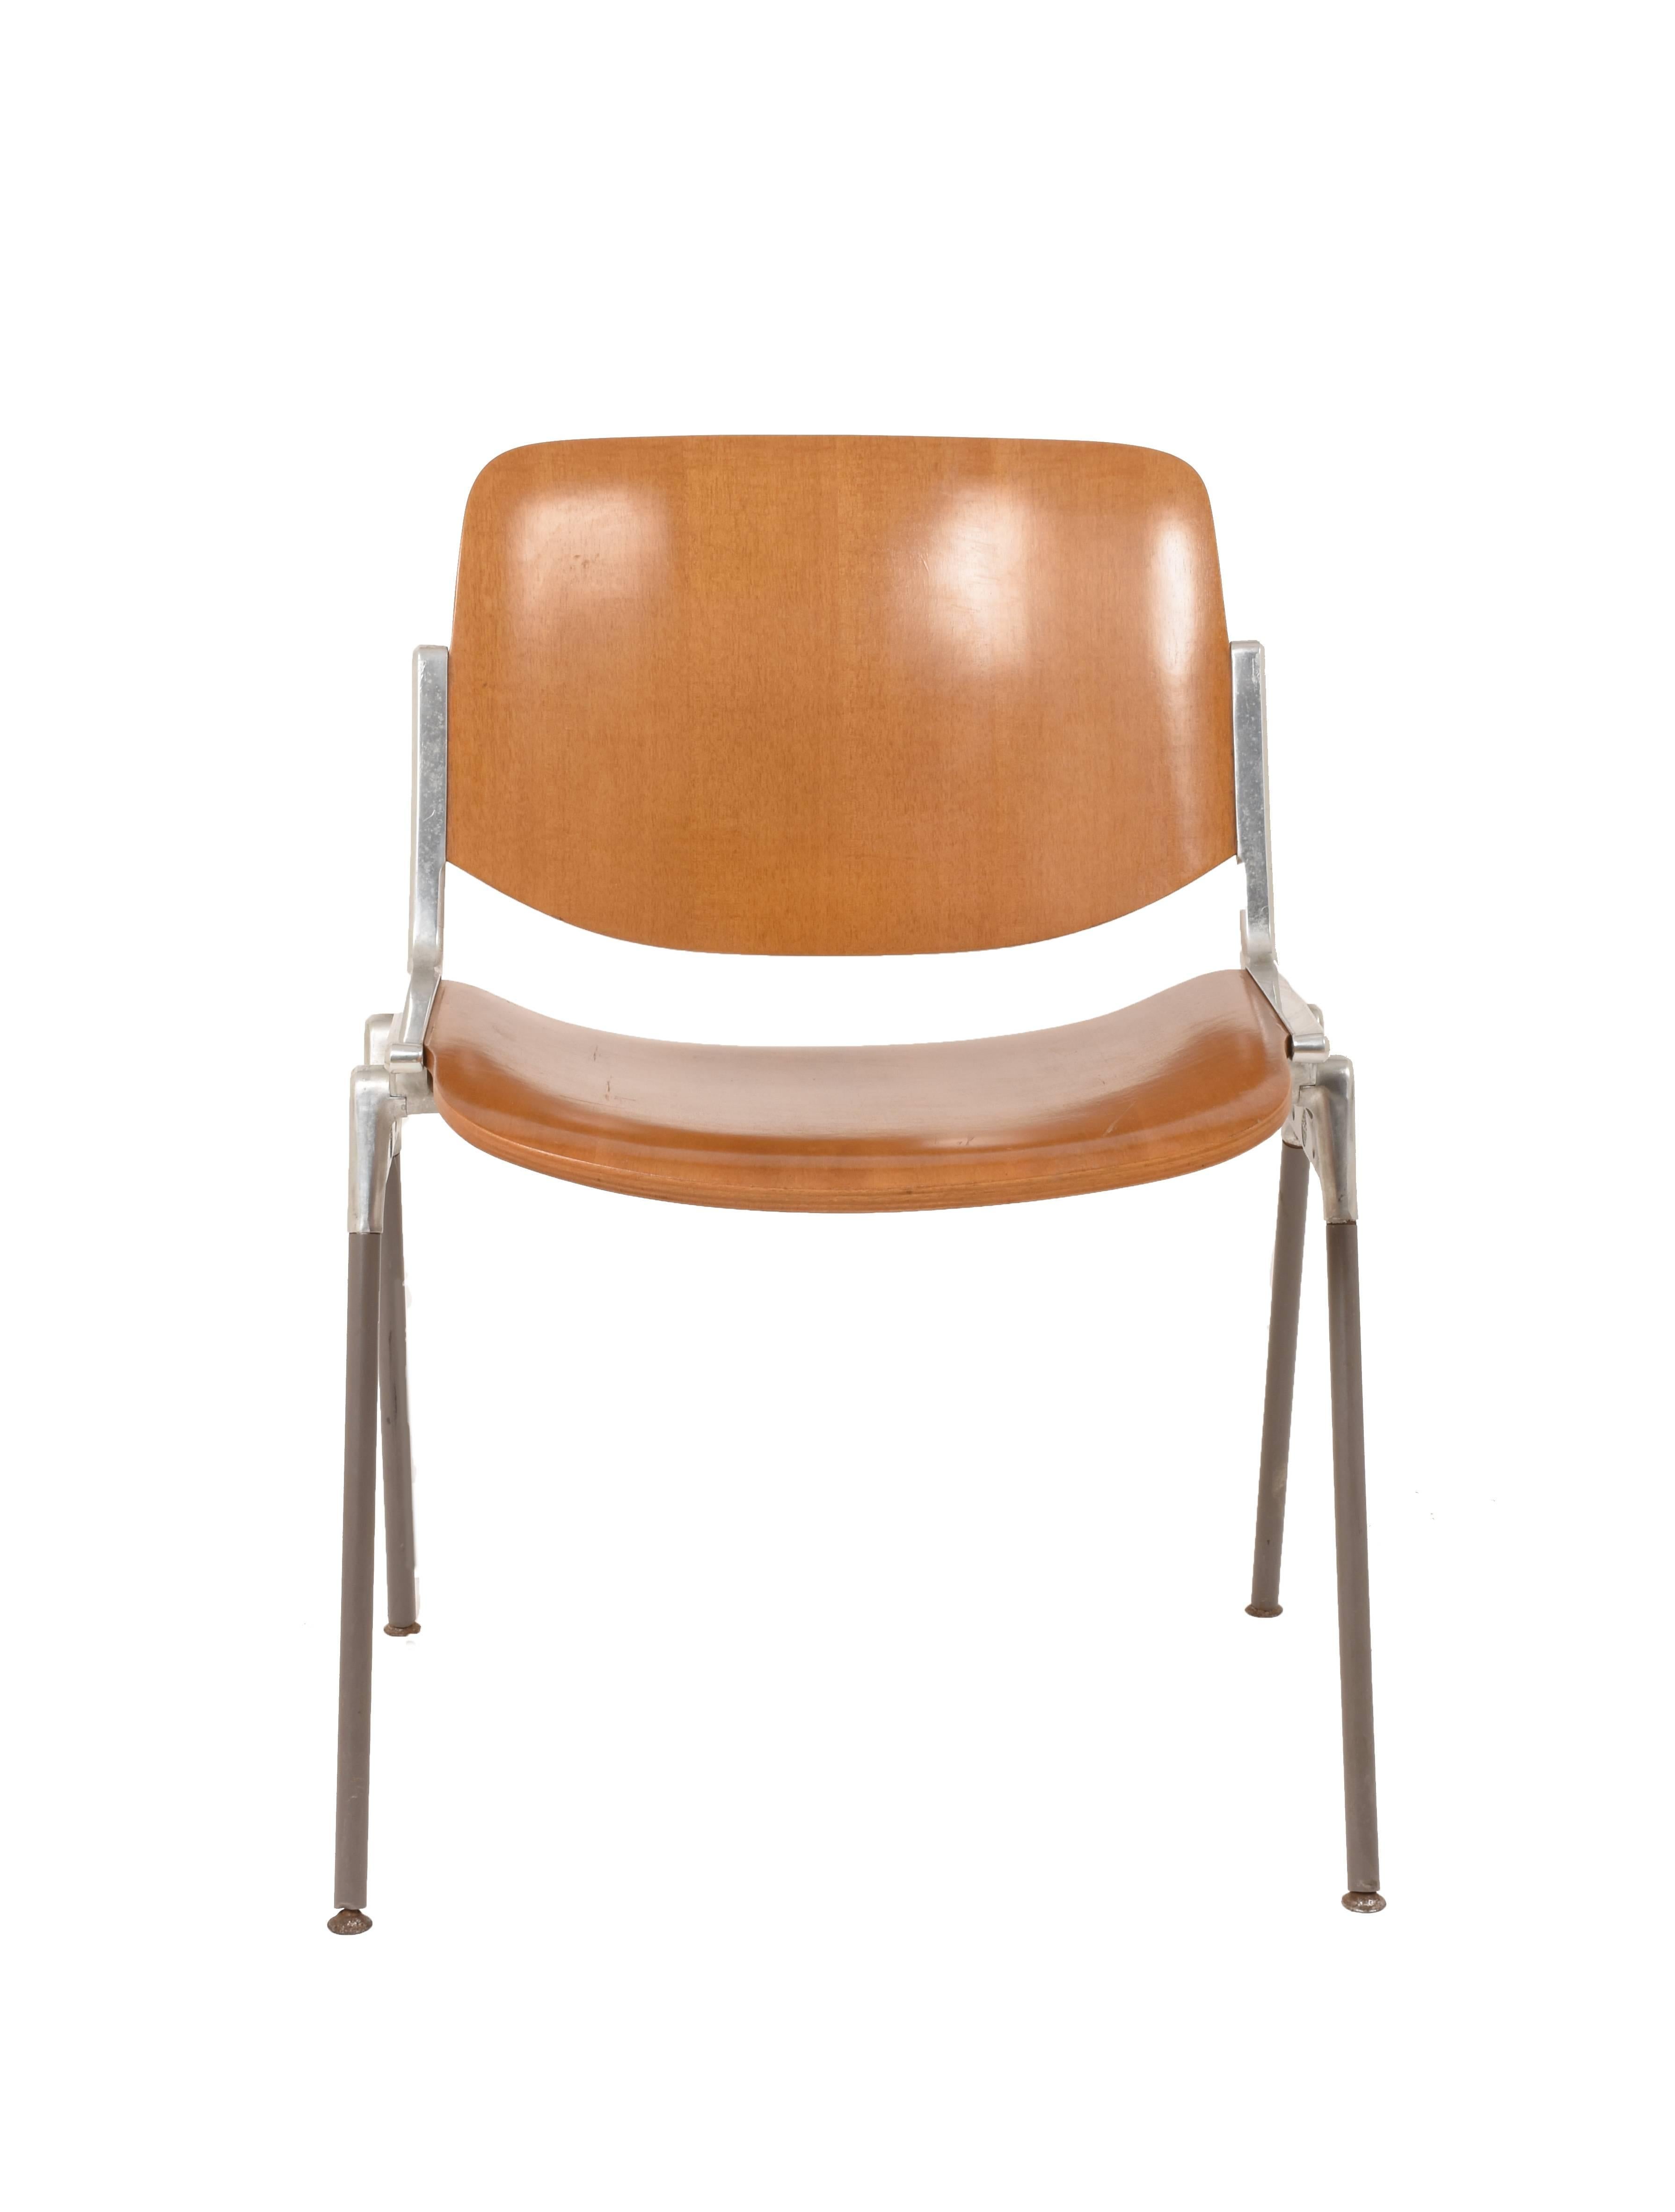 Mid-Century Modern Chair by Giancarlo Piretti for Castelli, Italy, 1960s